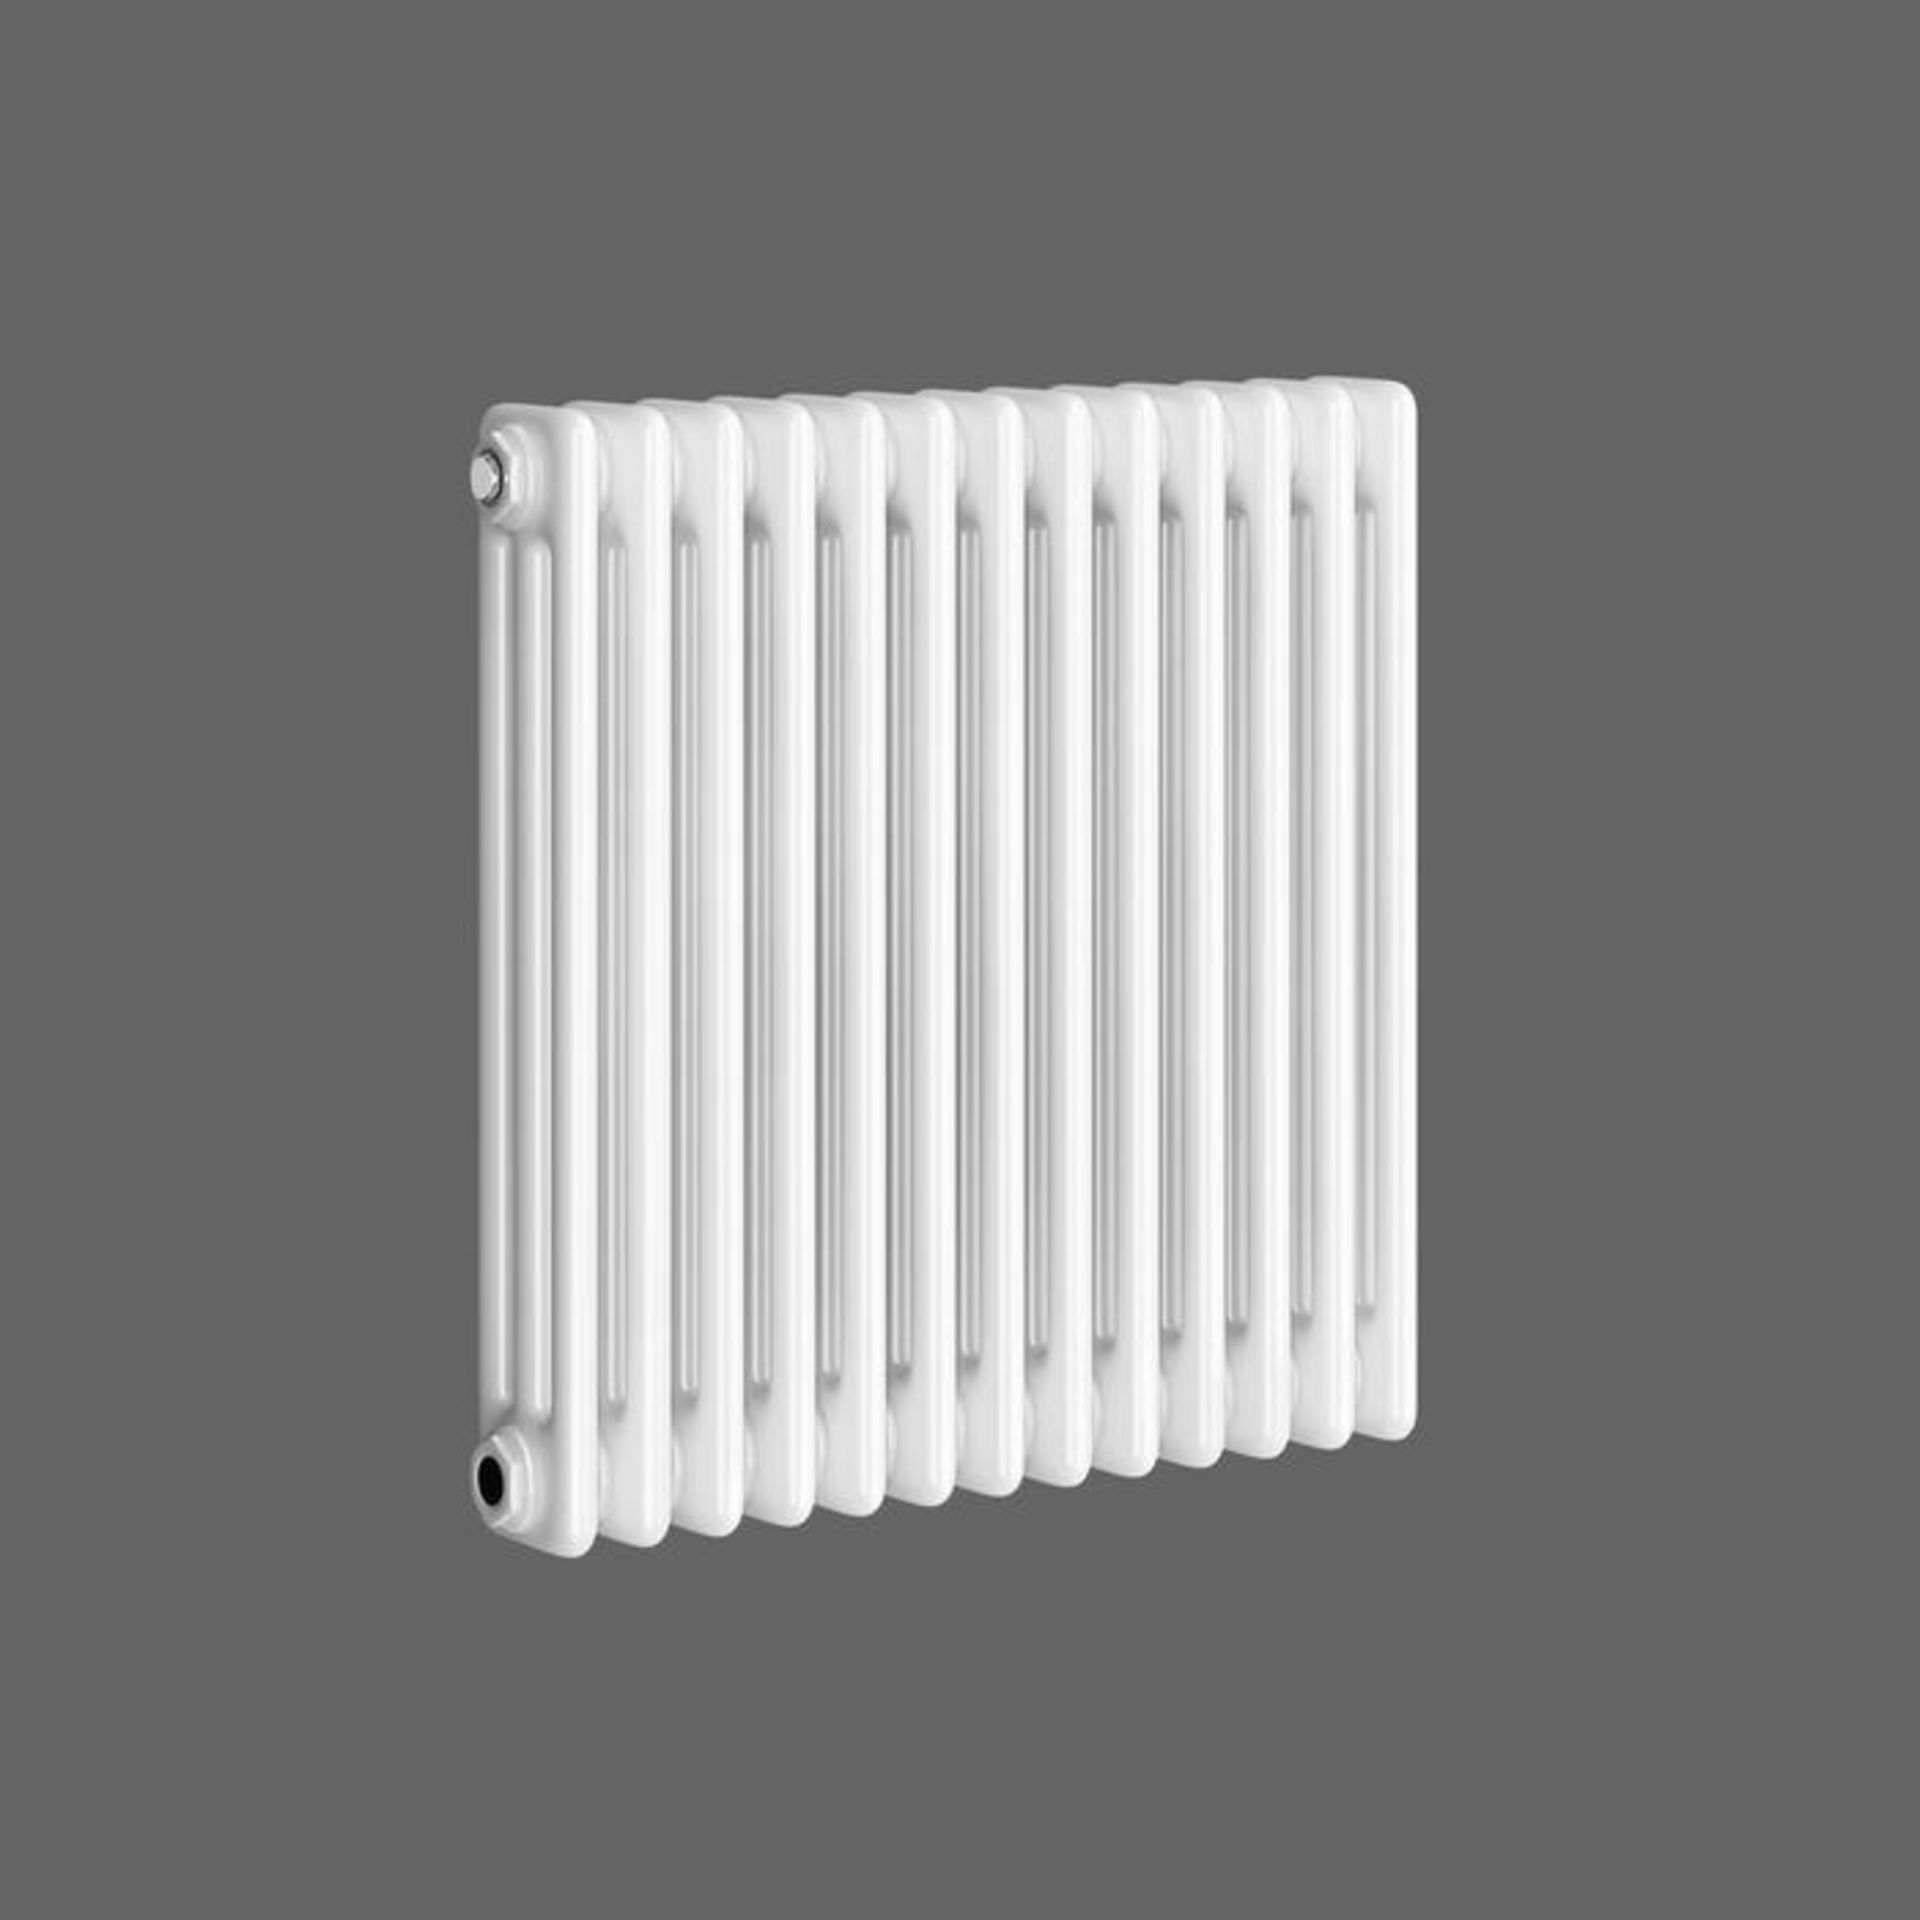 (XL20) 500x628mm White Double Panel Horizontal Colosseum Traditional Radiator. For elegant sty... - Image 2 of 2